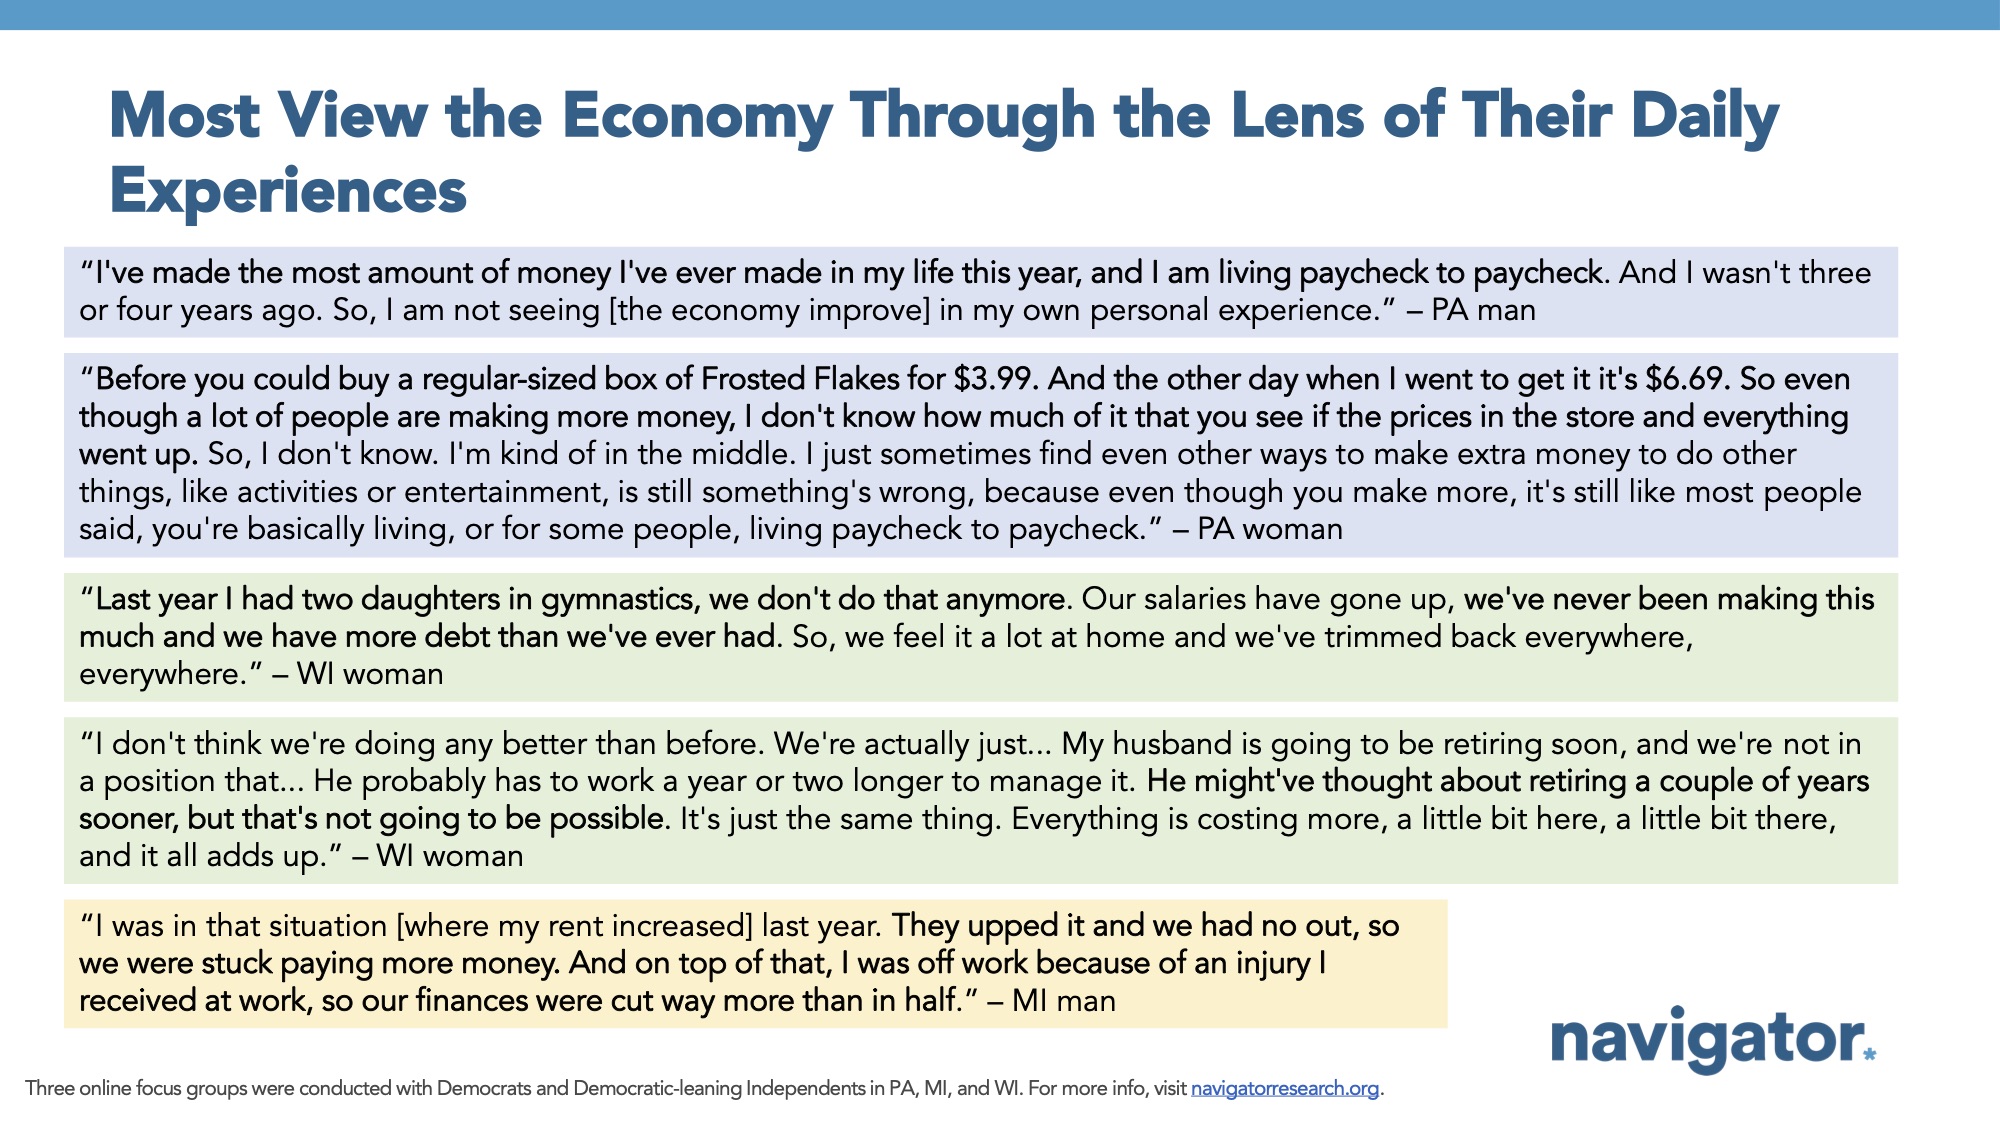 Focus group report slide titled: Most View the Economy Through the Lens of Their Daily Experiences